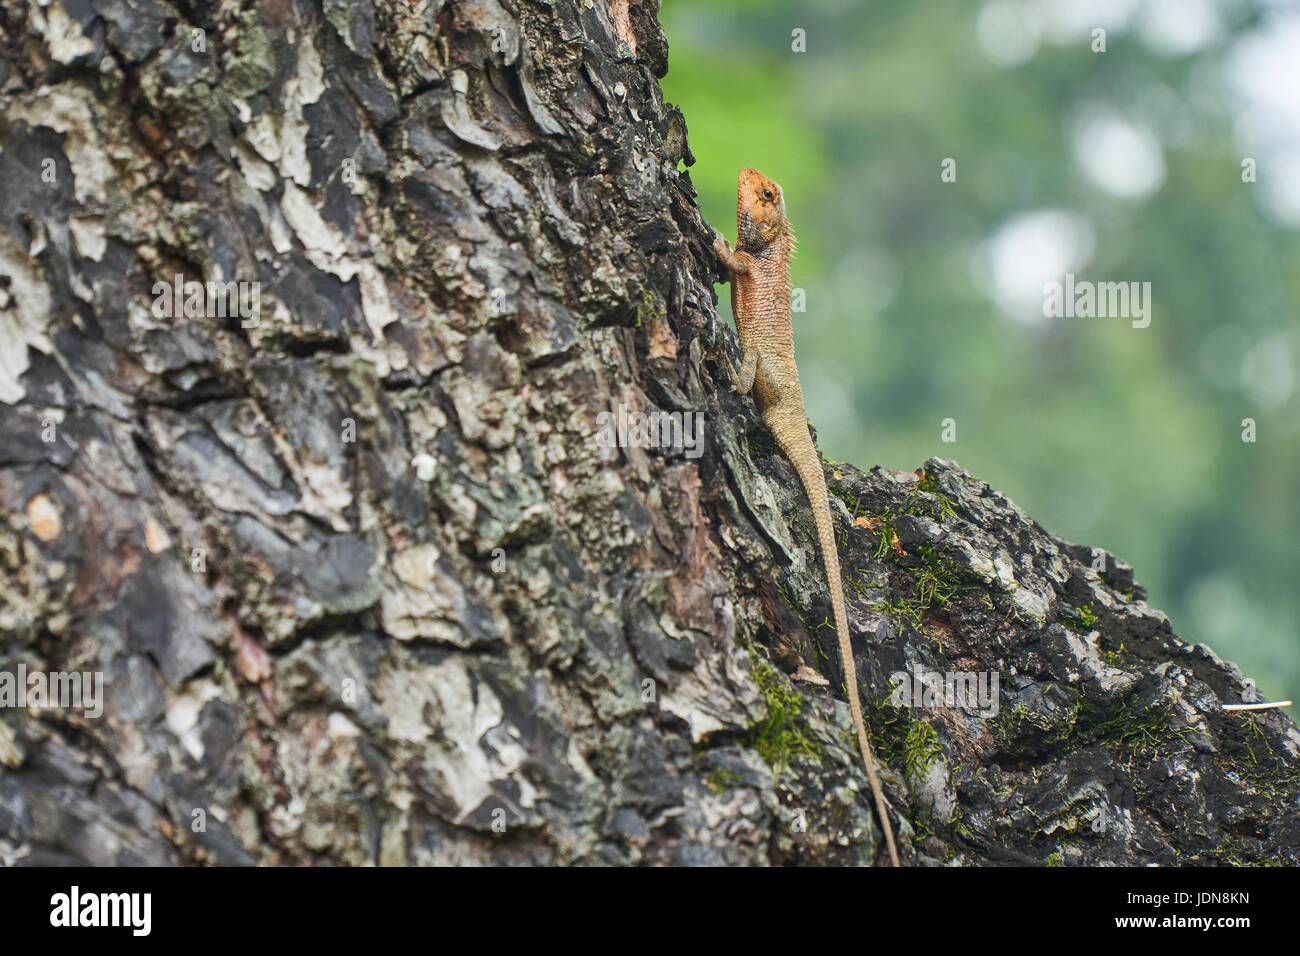 A yellow tree lizard resting on the tree Hue, vietnam. With copyspace. Stock Photo